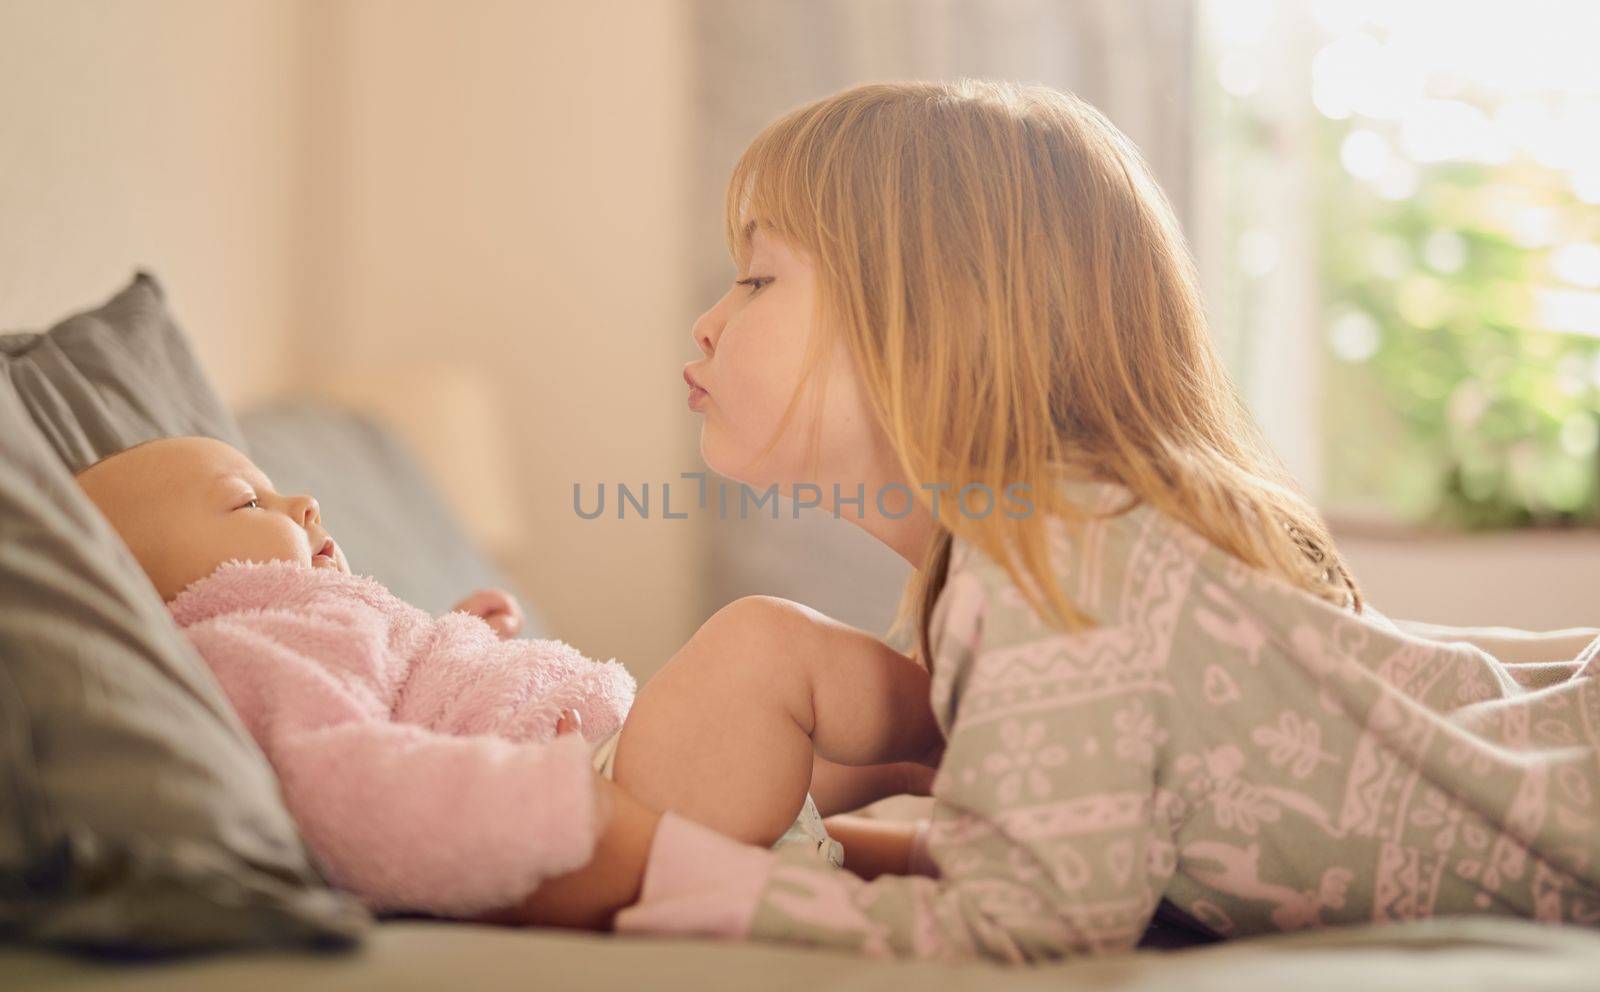 There is no better friend than a sister. a cute little girl playing with her baby sister on a bed